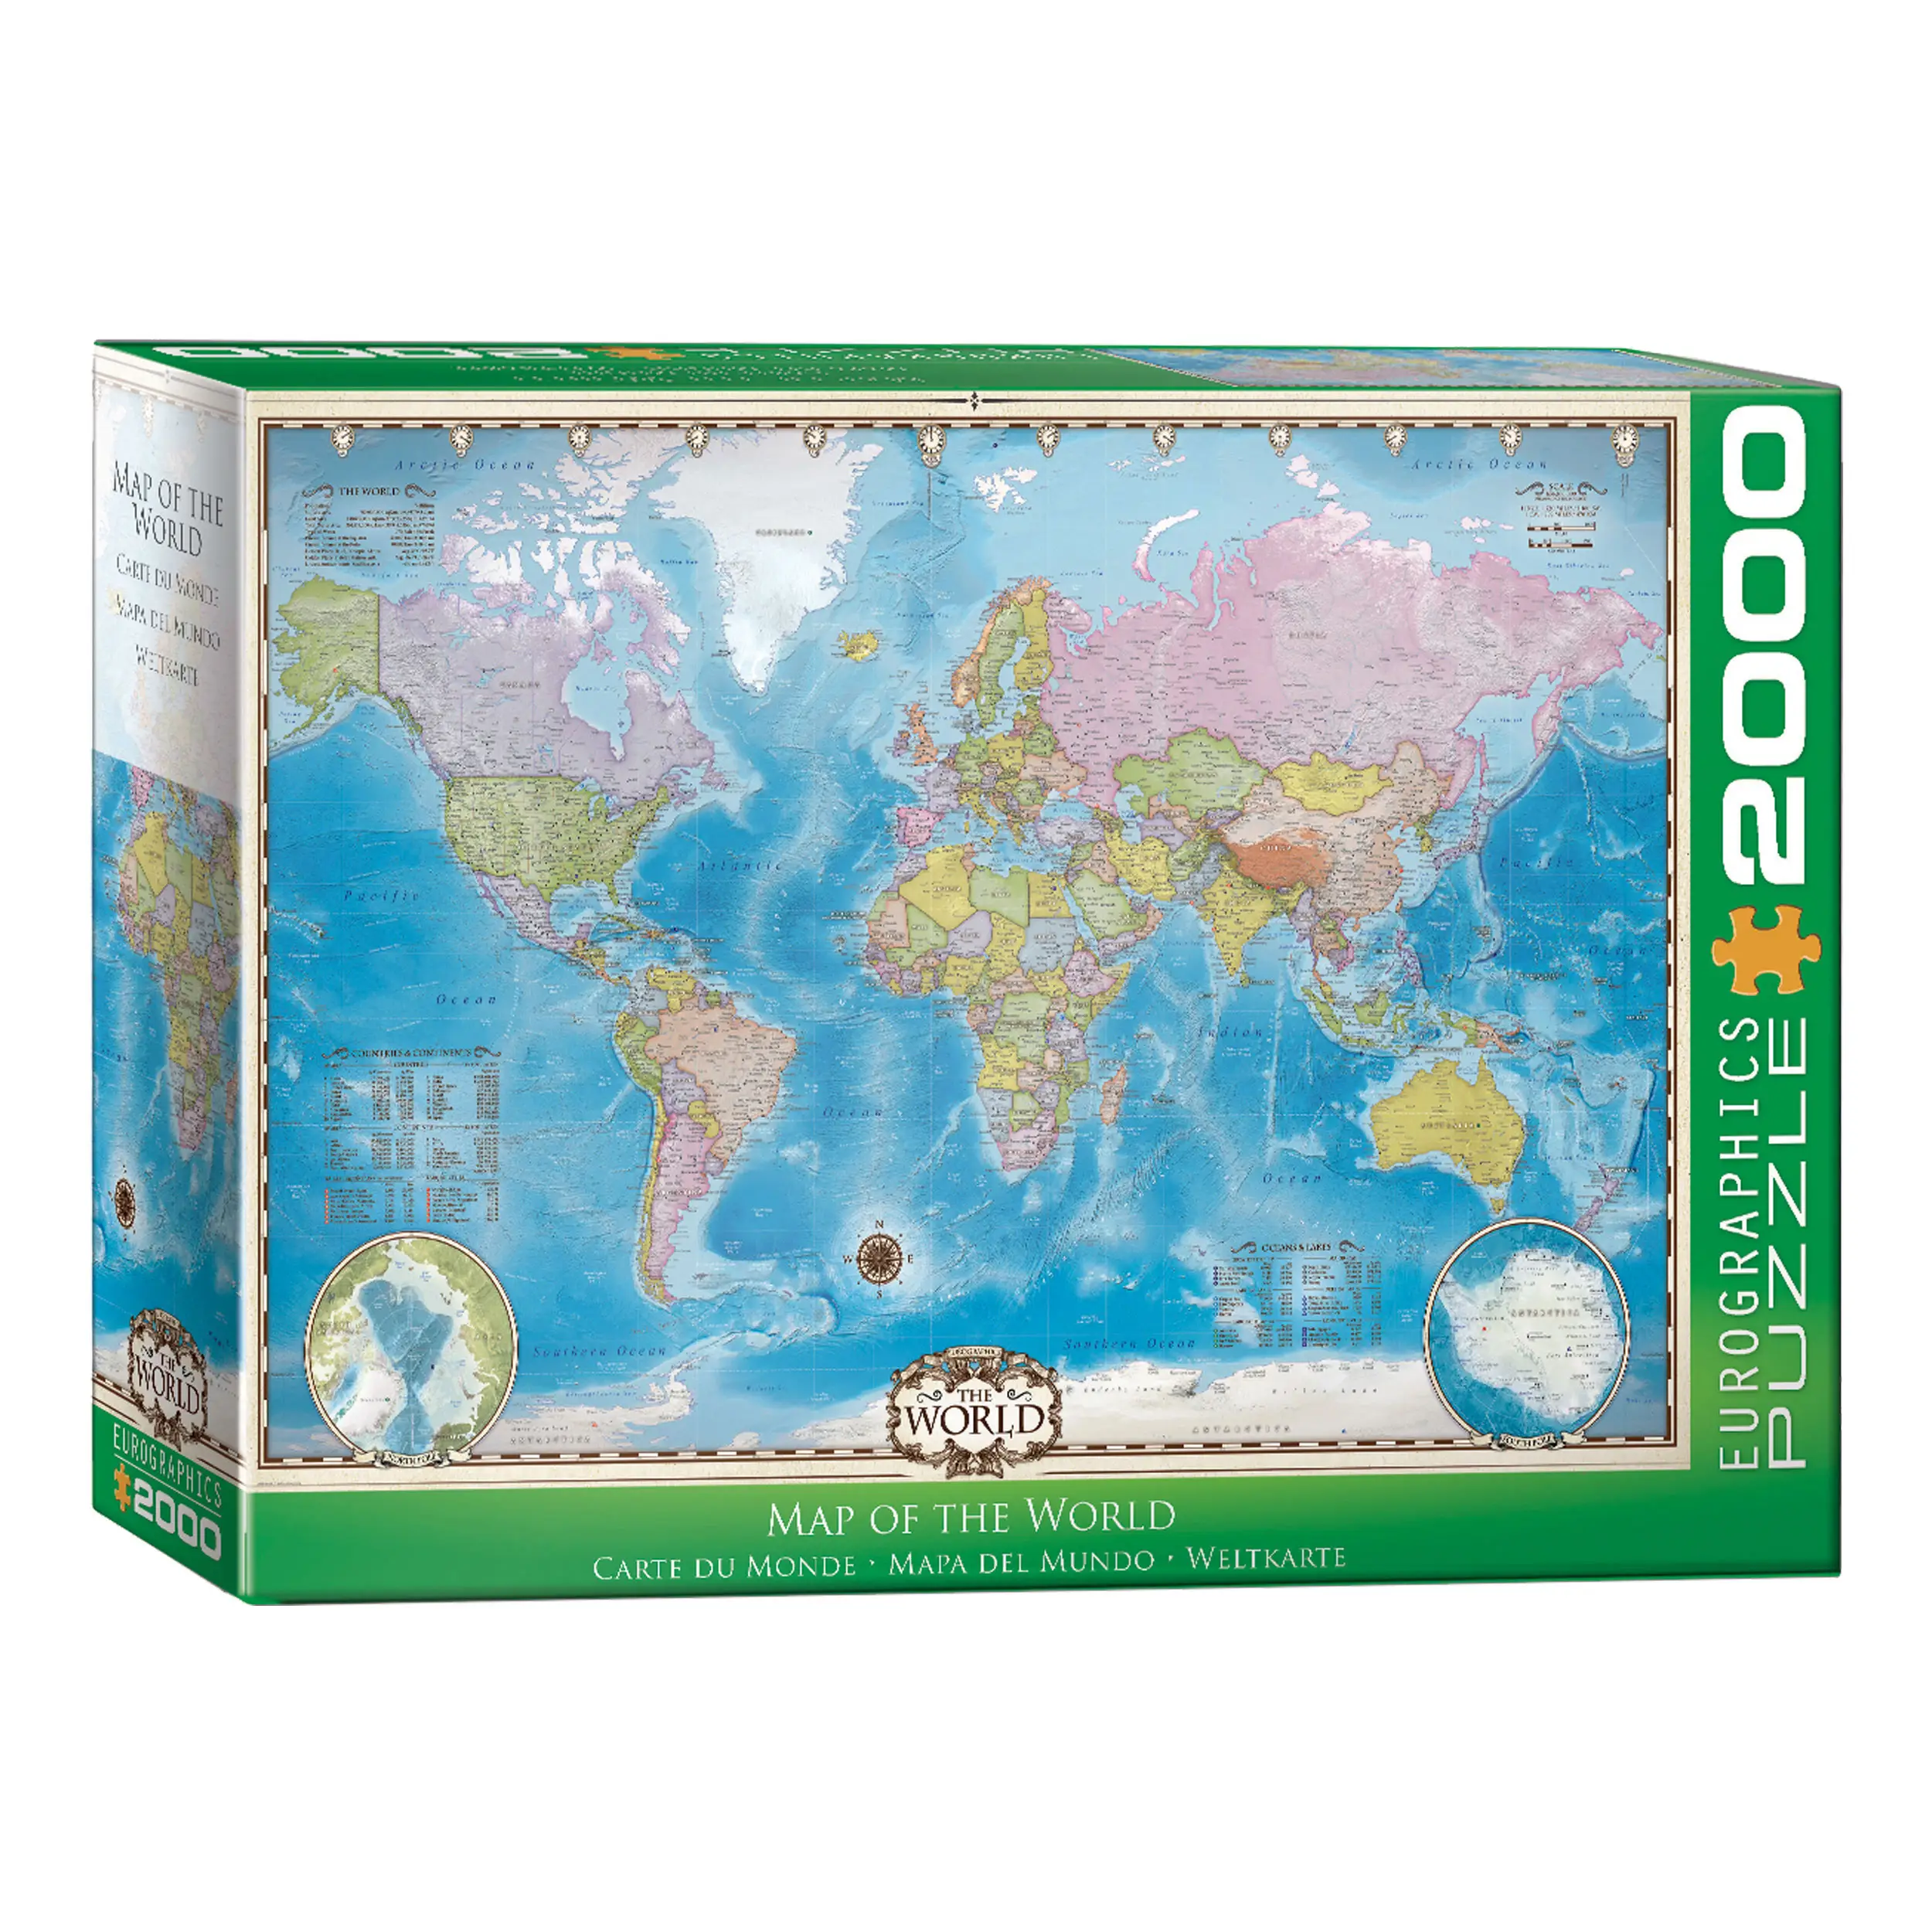 Puzzle Map the World of